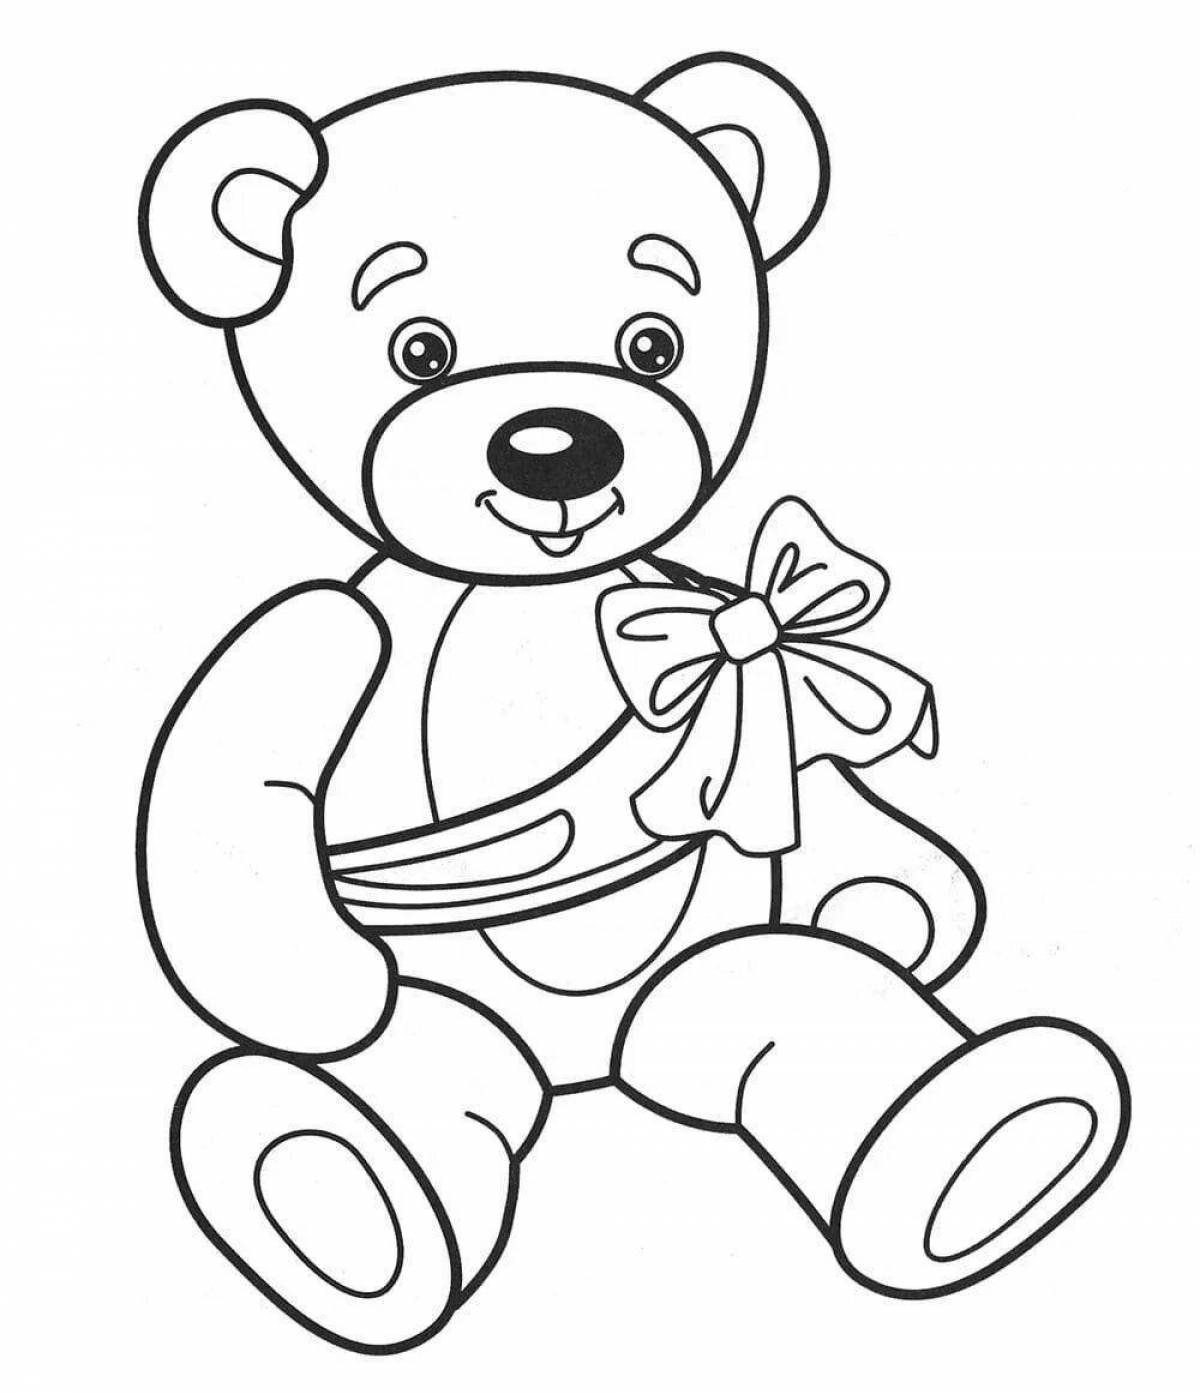 Magic coloring bear for children 5-6 years old